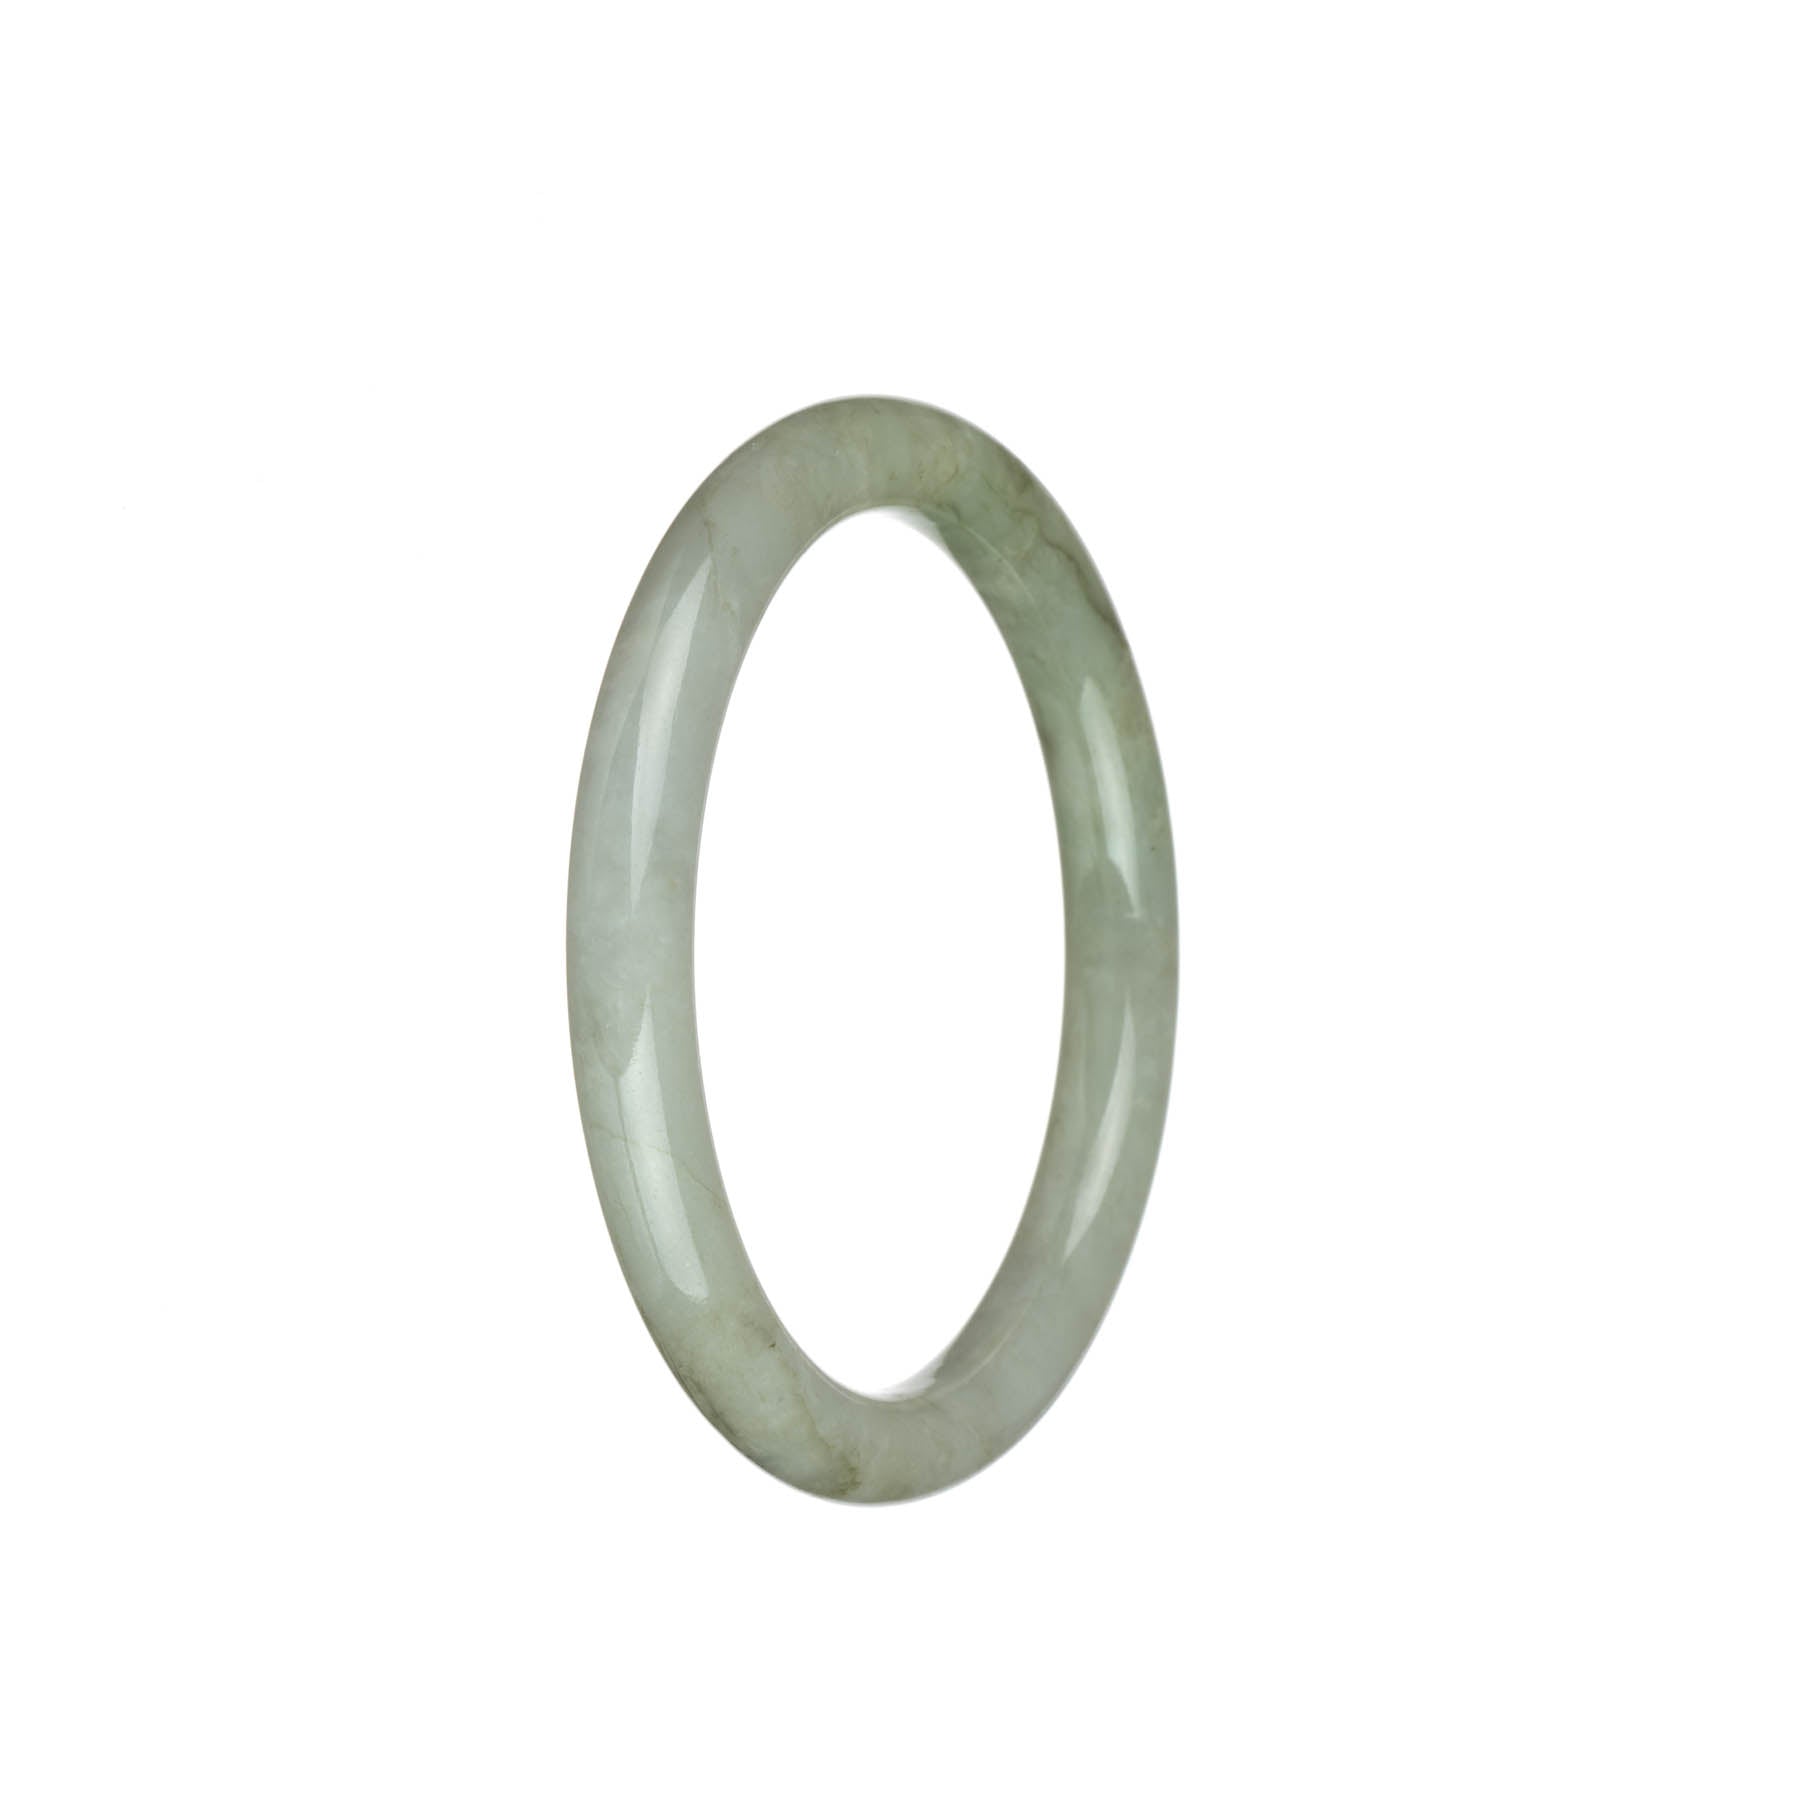 Authentic Grade A Pale Green with White Burma Jade Bangle - 56mm Petite Round